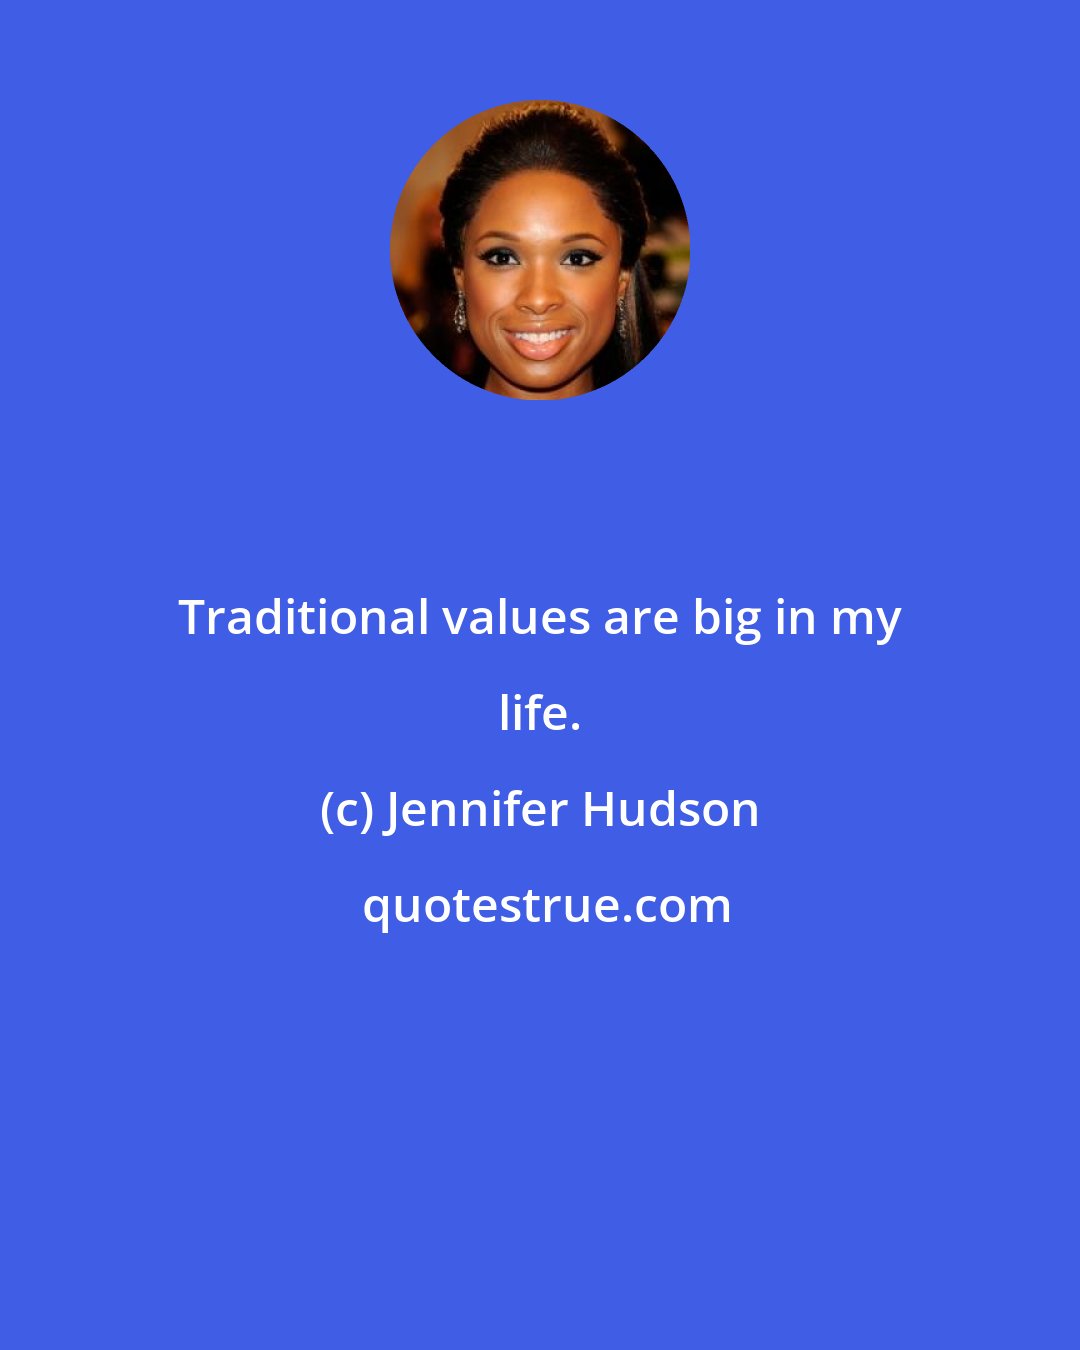 Jennifer Hudson: Traditional values are big in my life.